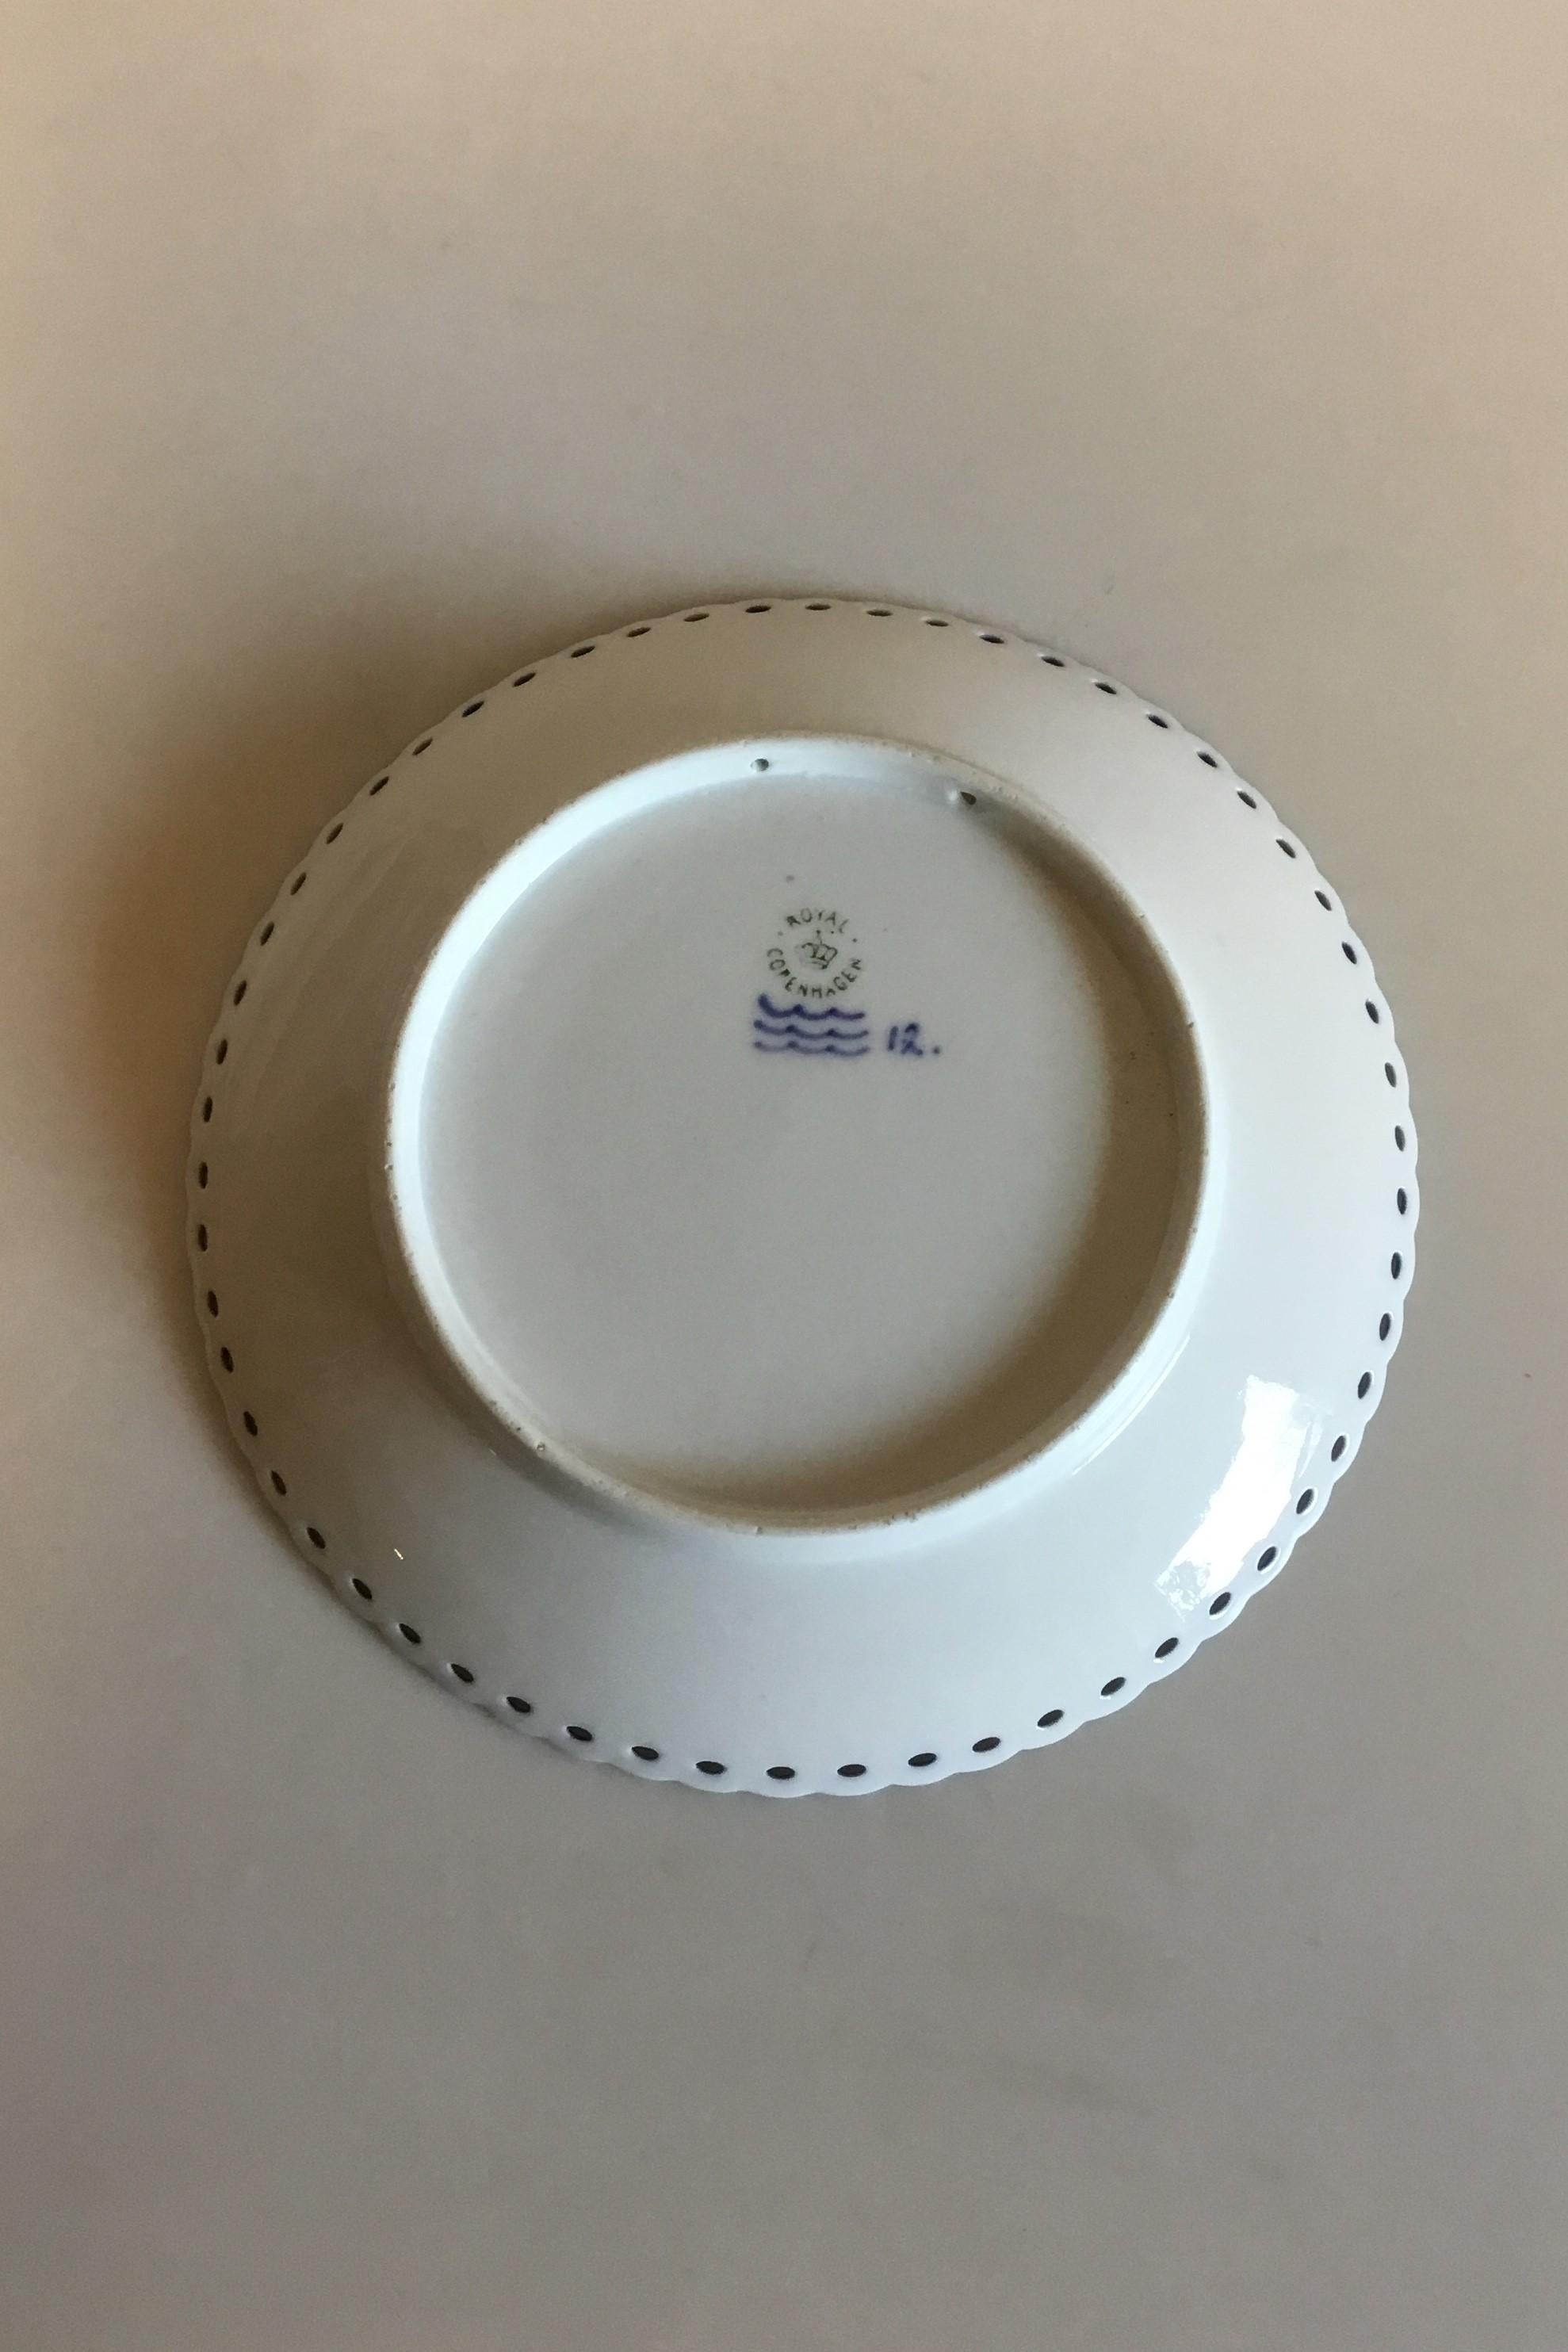 Royal Copenhagen Commemorative Plate from 1908 RC-CM83. Measures 19.5 cm / 7 43/64 in. and is in good condition.